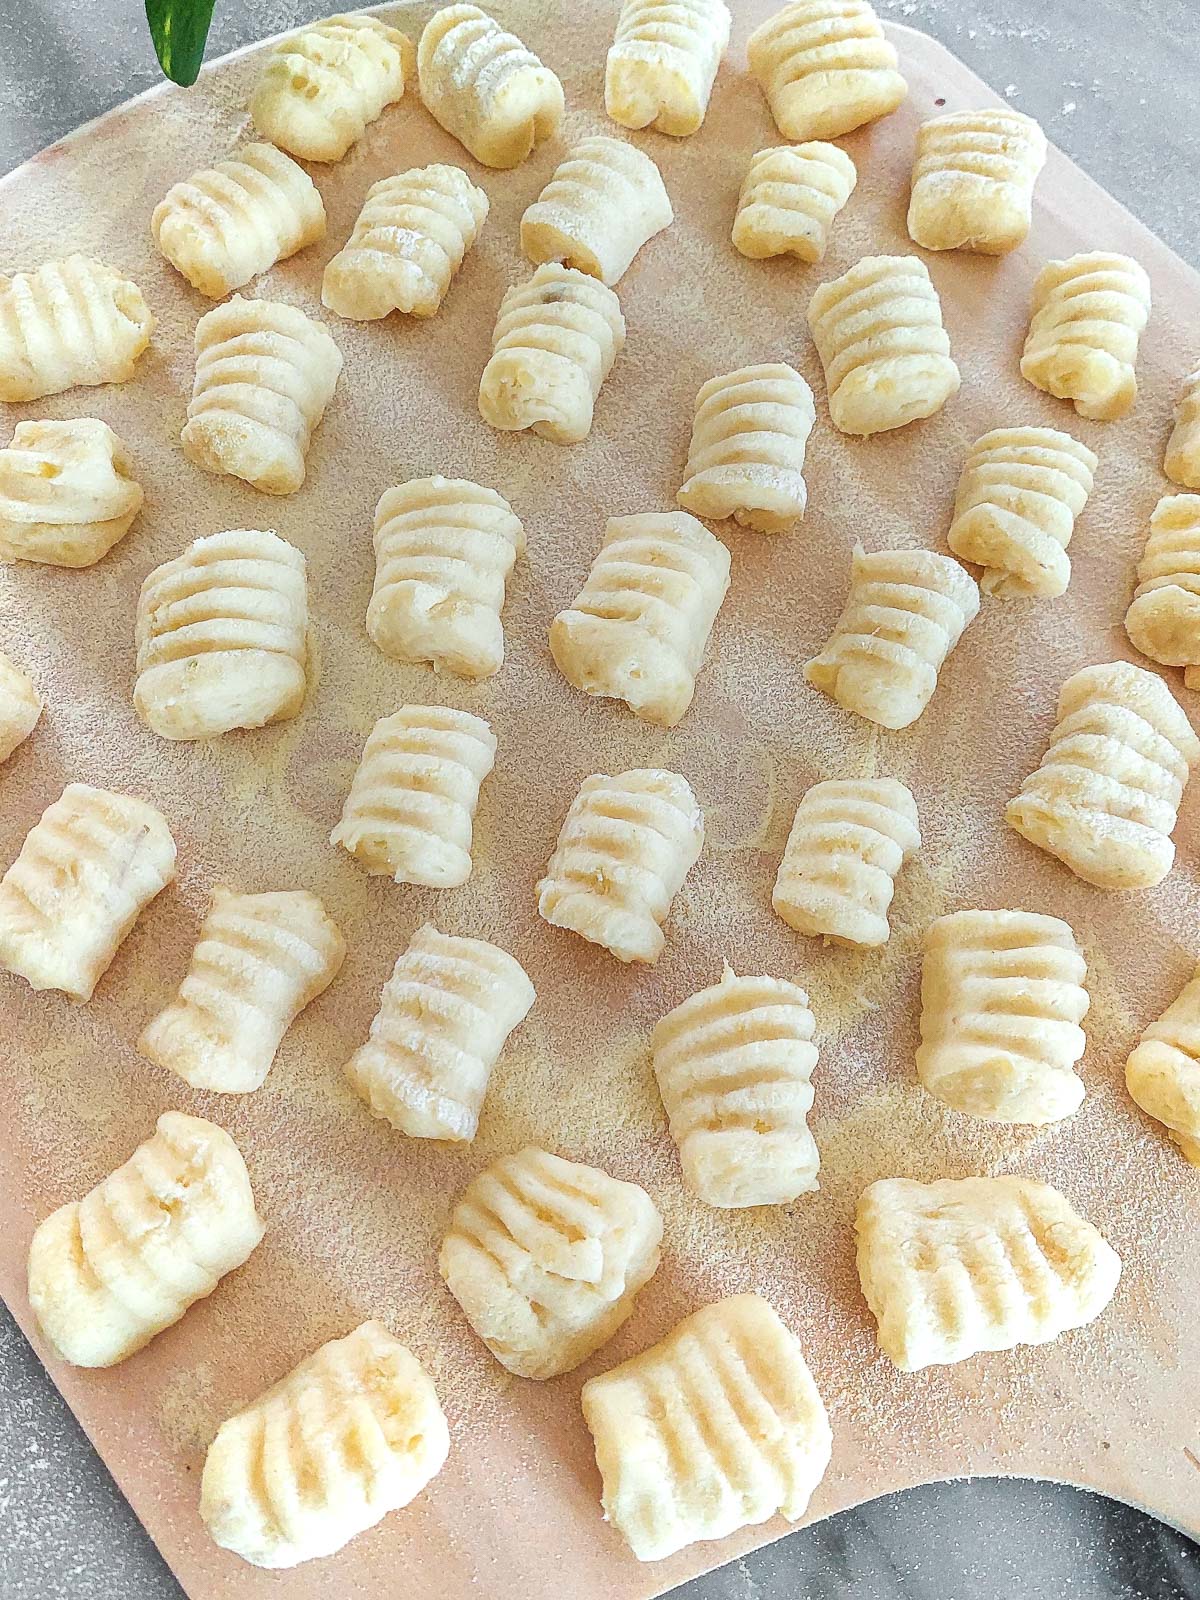 gnocchi made with a fork